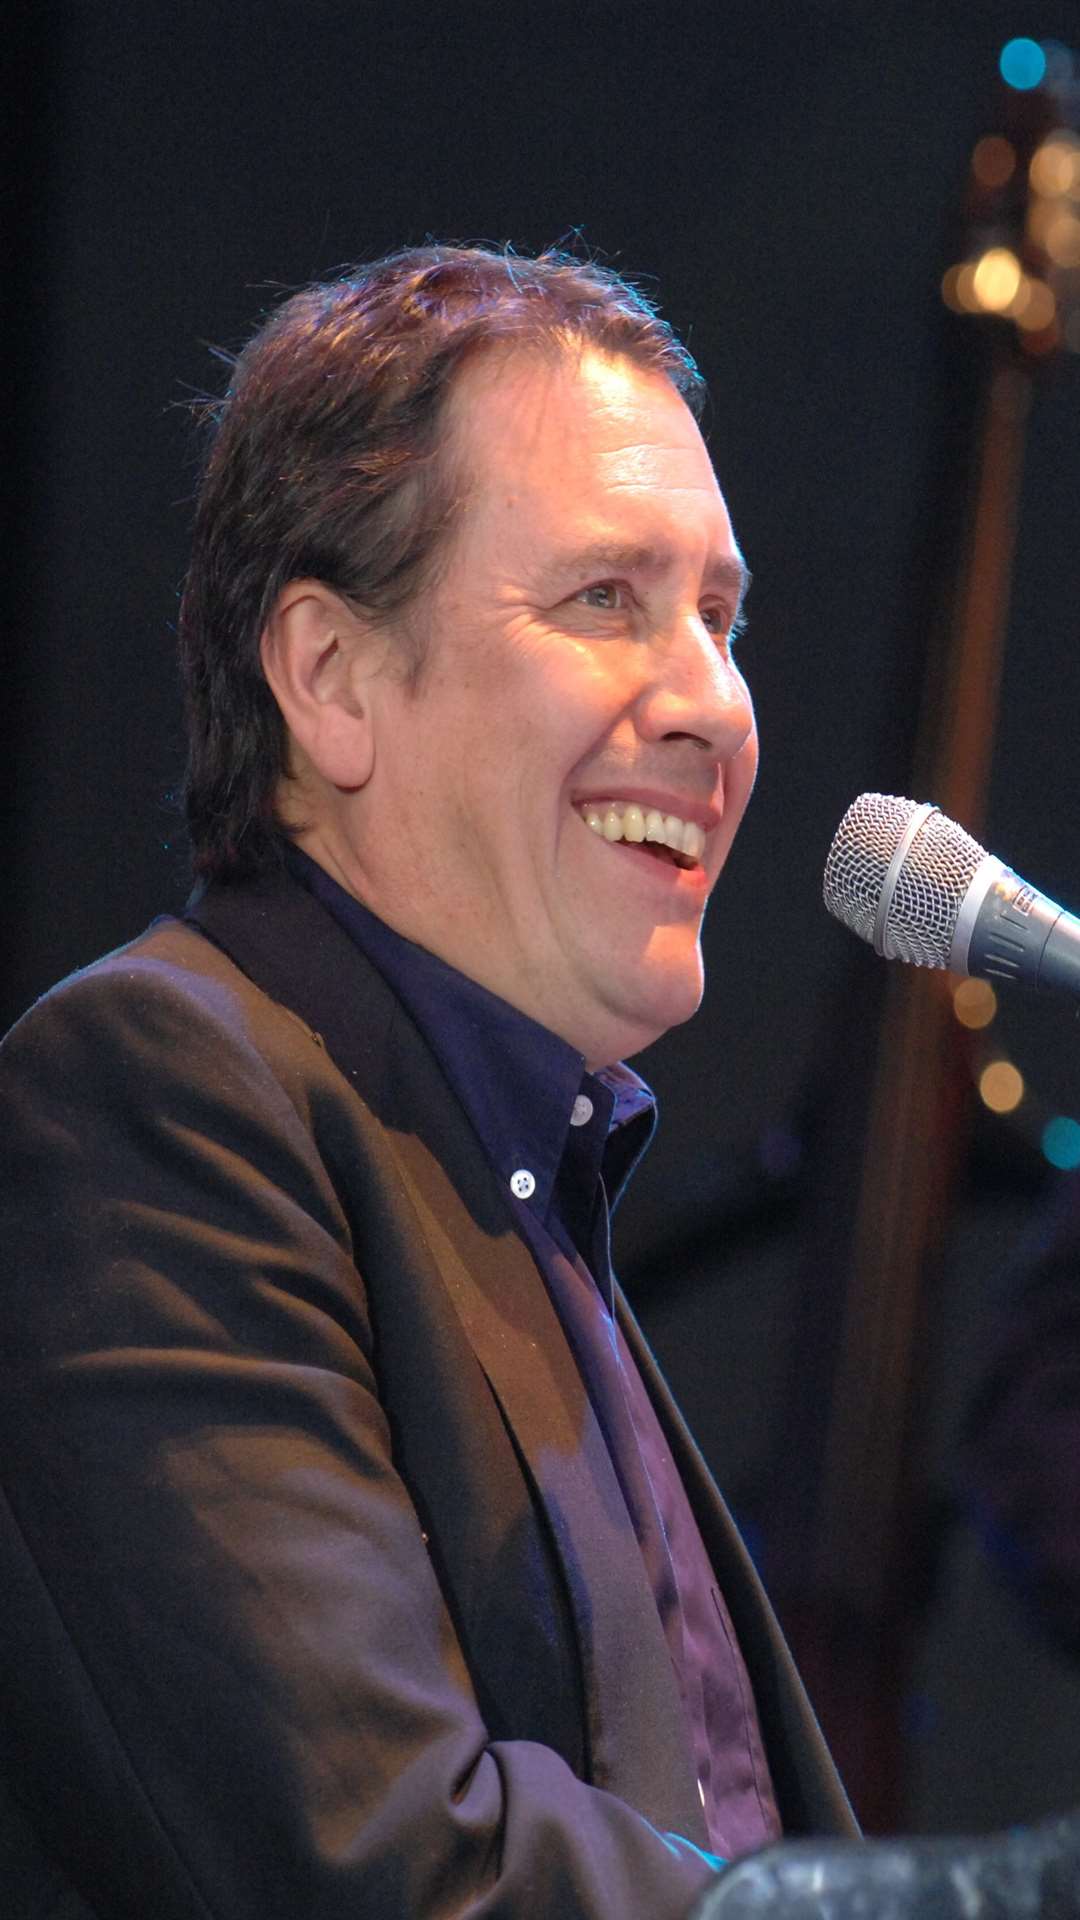 Jools Holland is said to be a supporter of the model railway centre